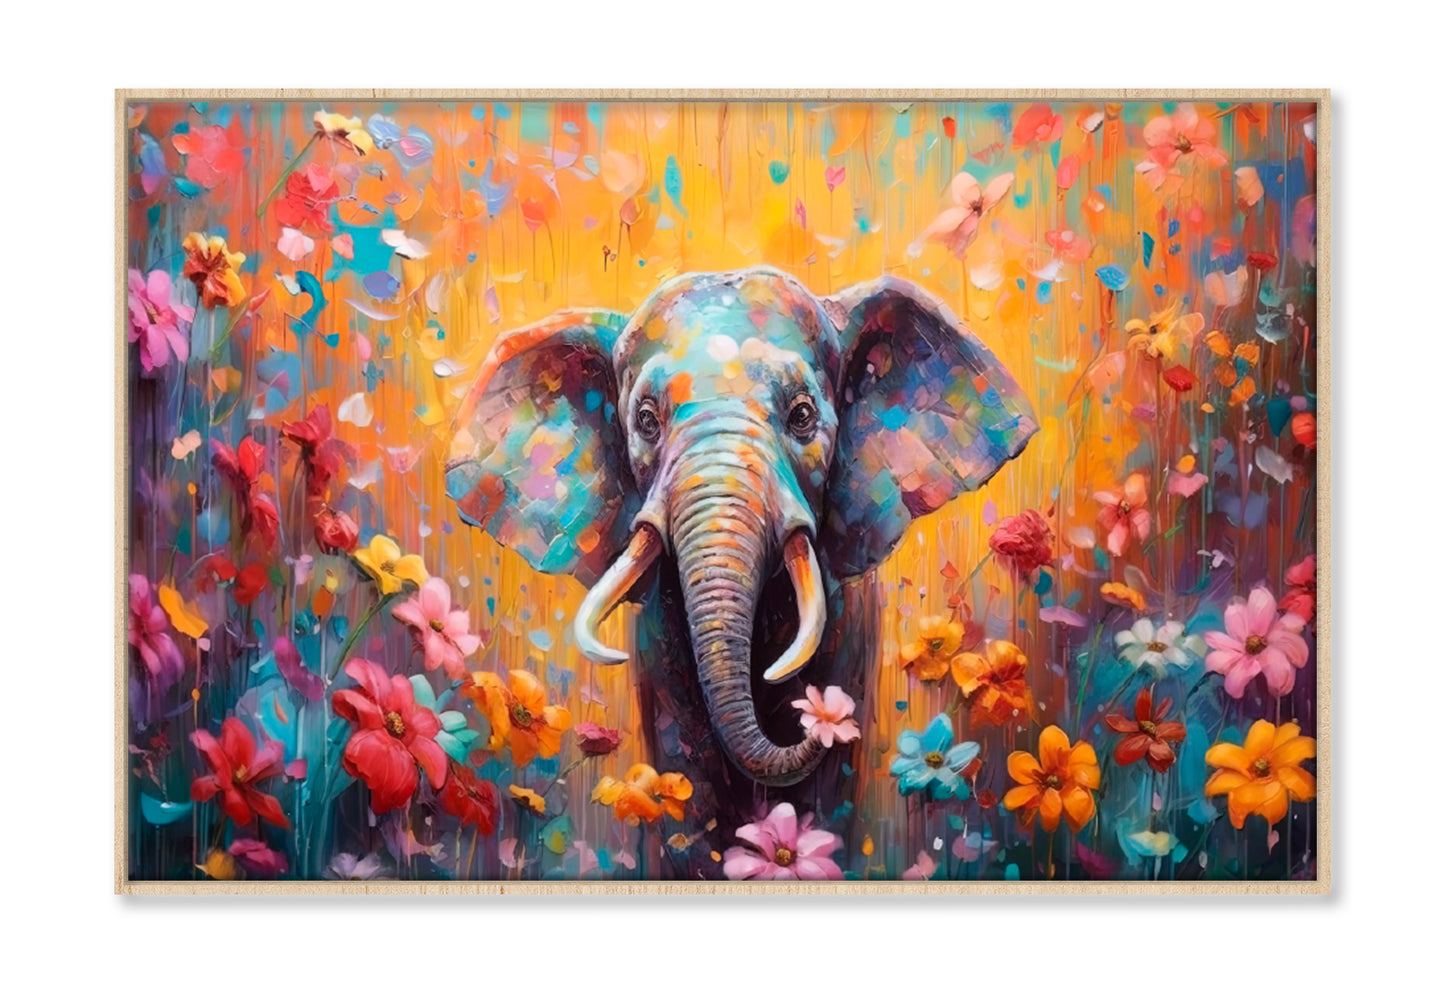 Elephant In Flower Blossom Paint Limited Edition High Quality Print Canvas Box Framed Natural